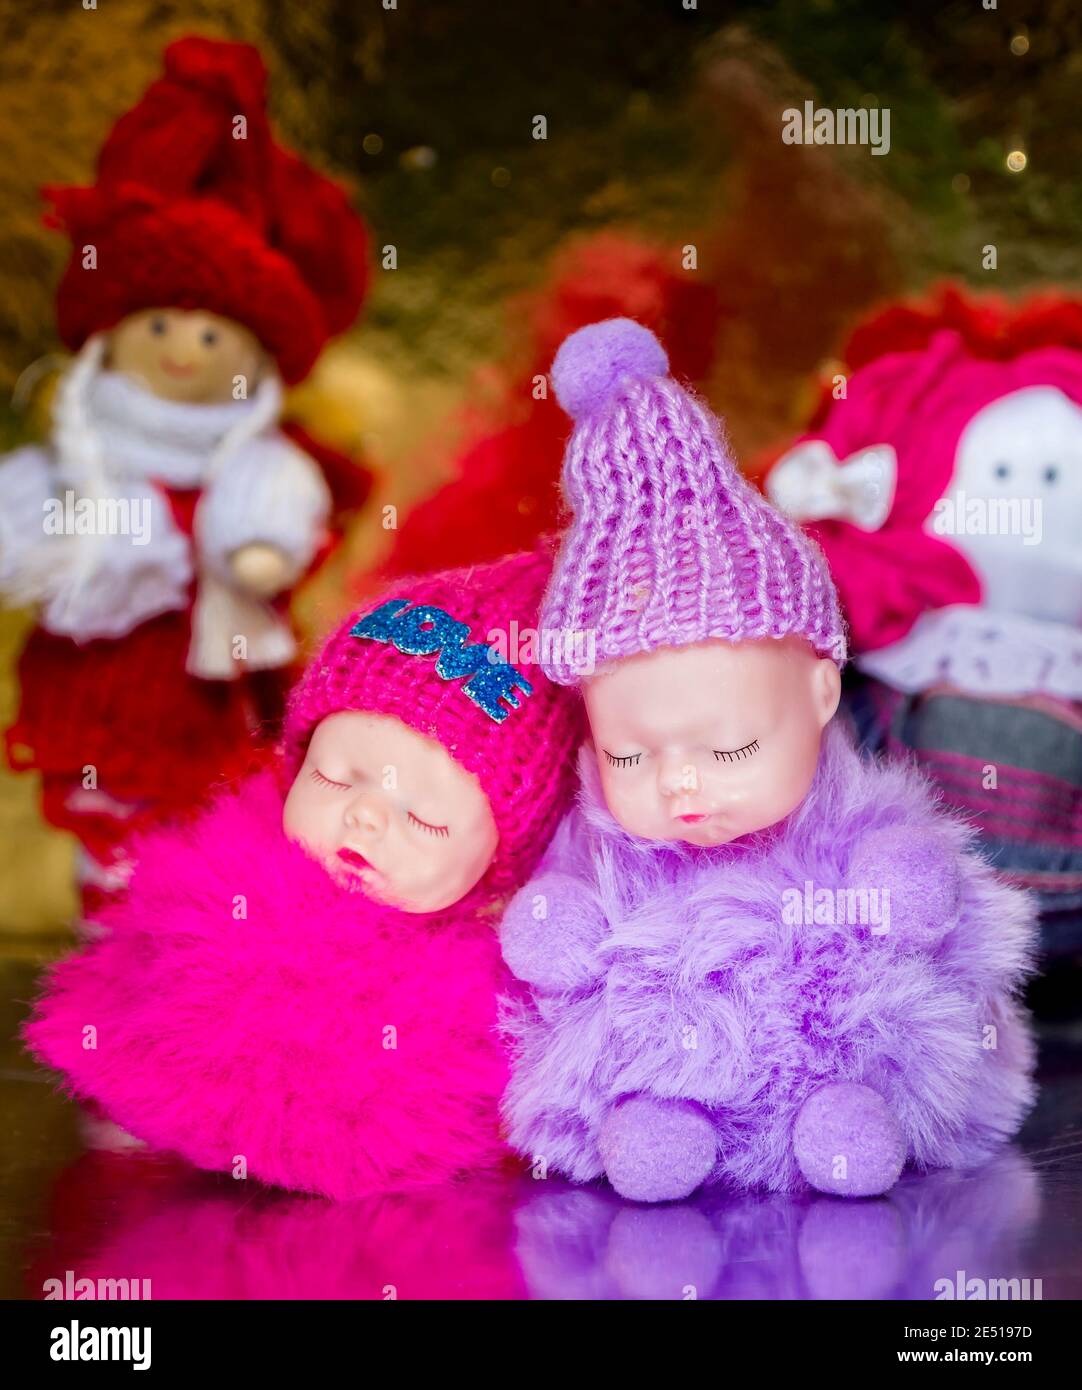 Two toy figures of small children in warm clothes Pink and red are sleeping. Love is written on the cap. And handmade toys for children's. Golden back Stock Photo